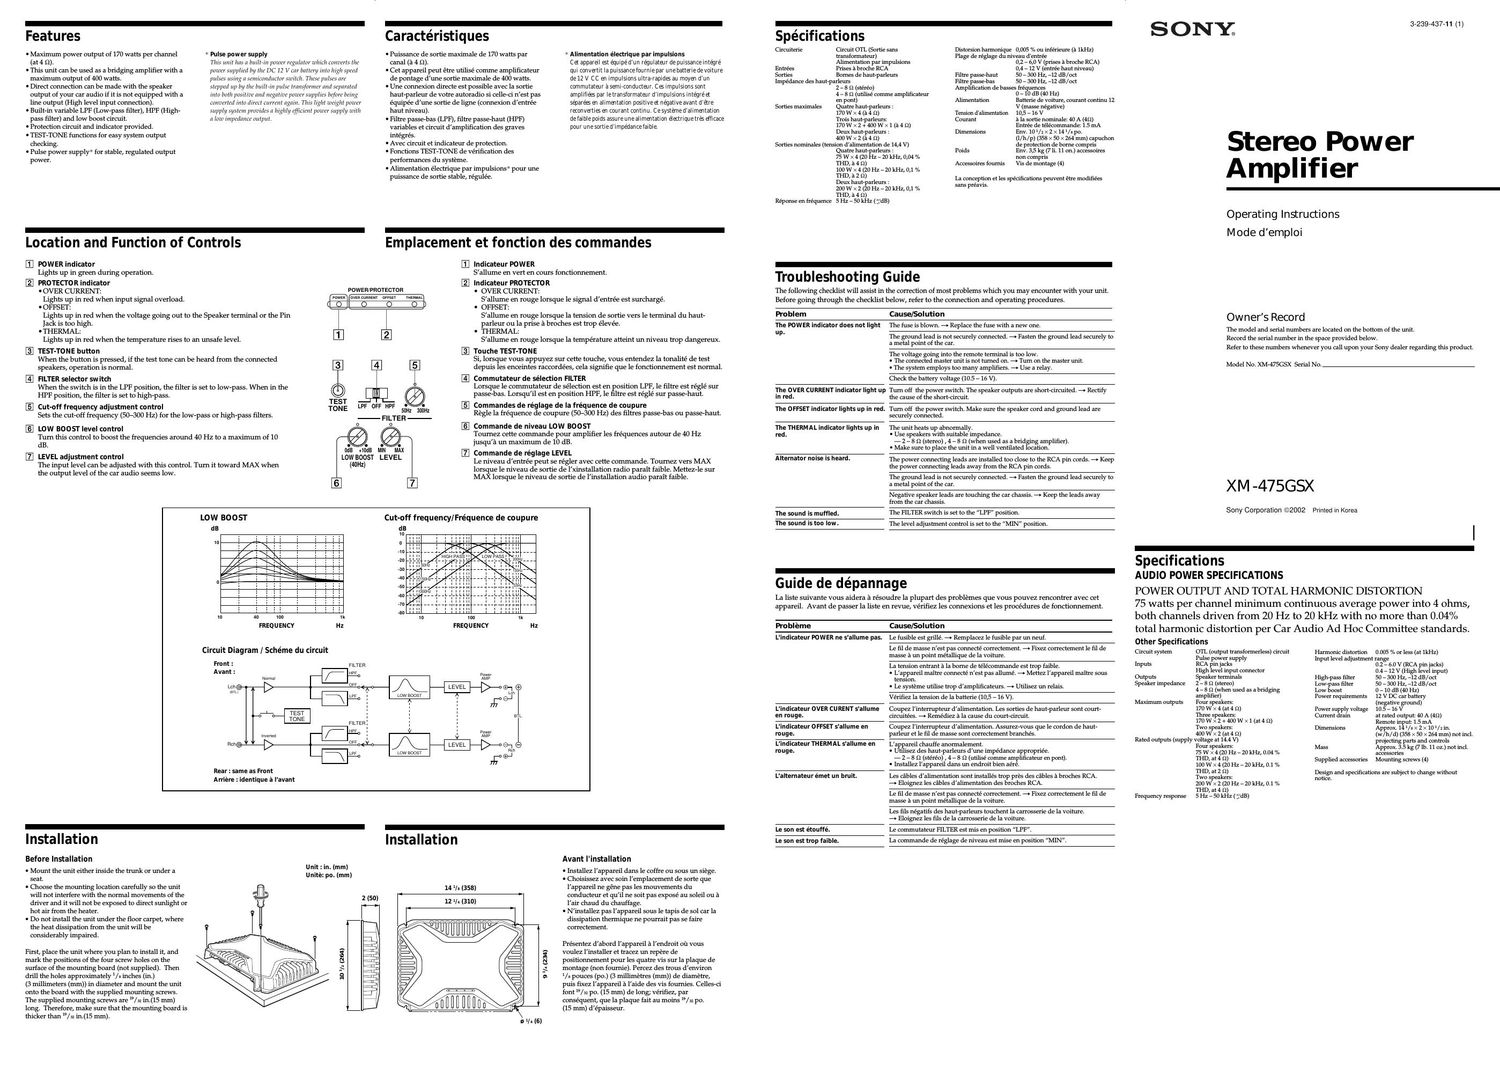 sony xm 475 gsx owners manual